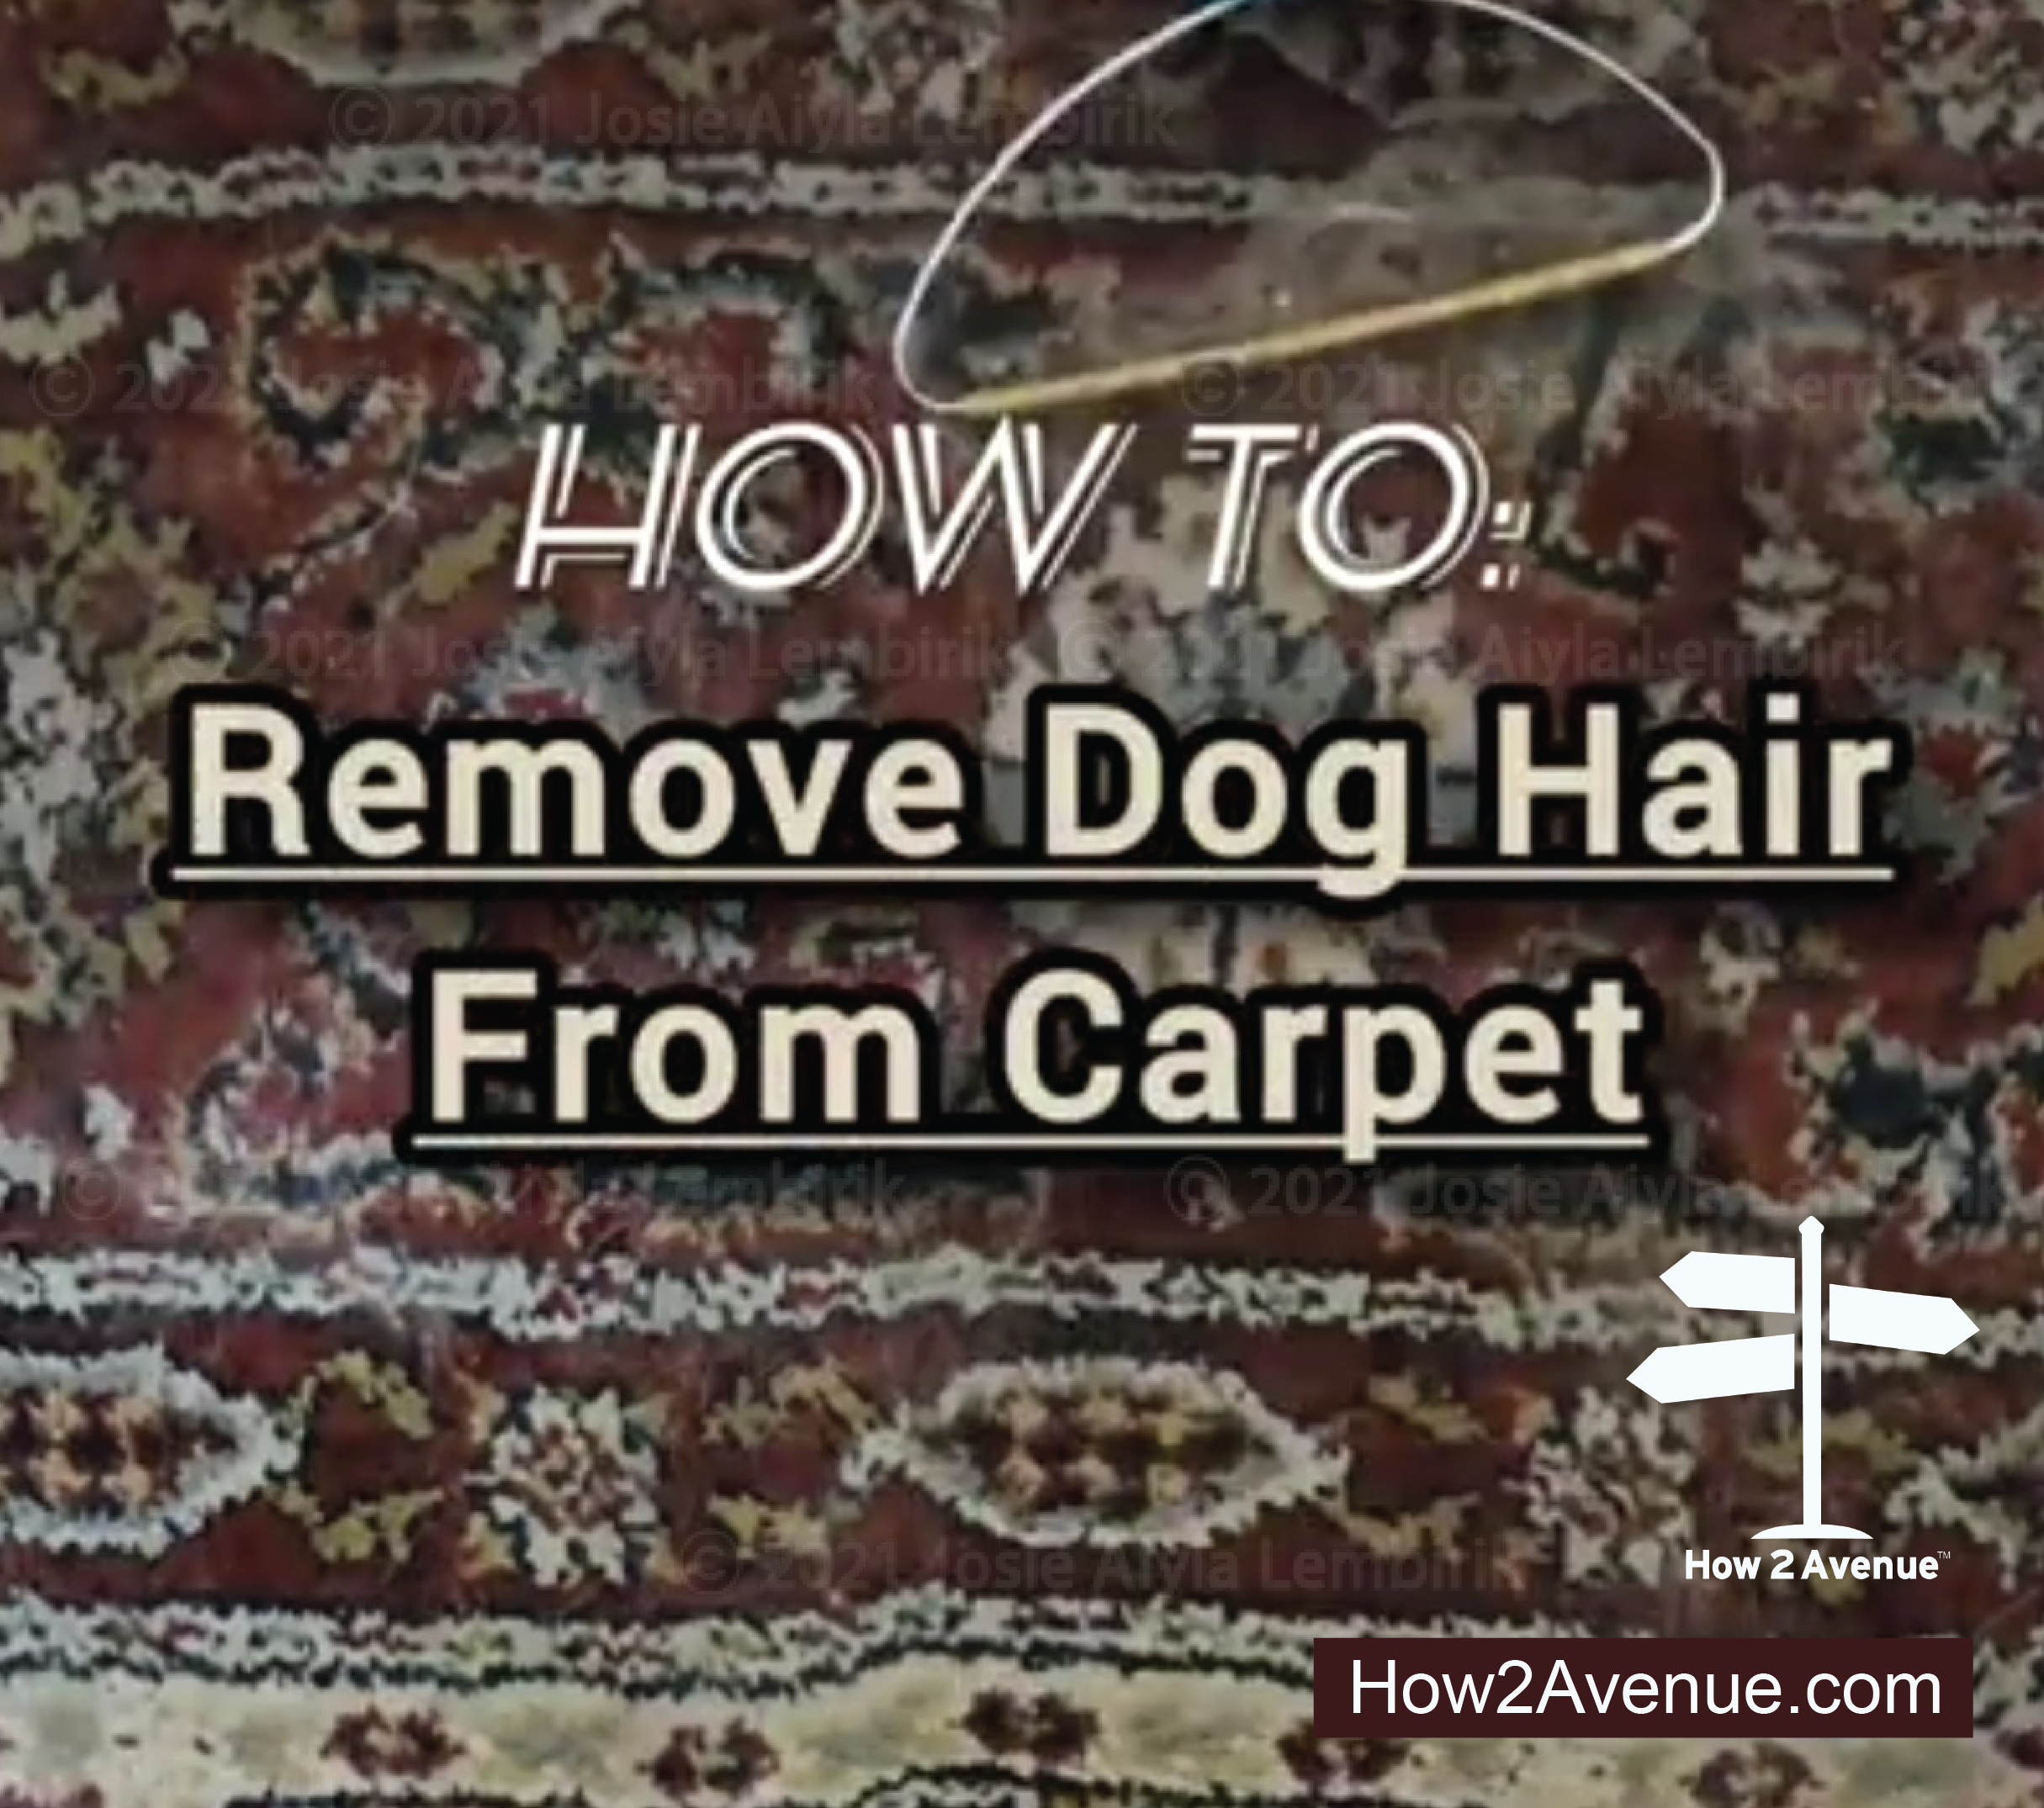 How to Remove Dog Hair From Carpet